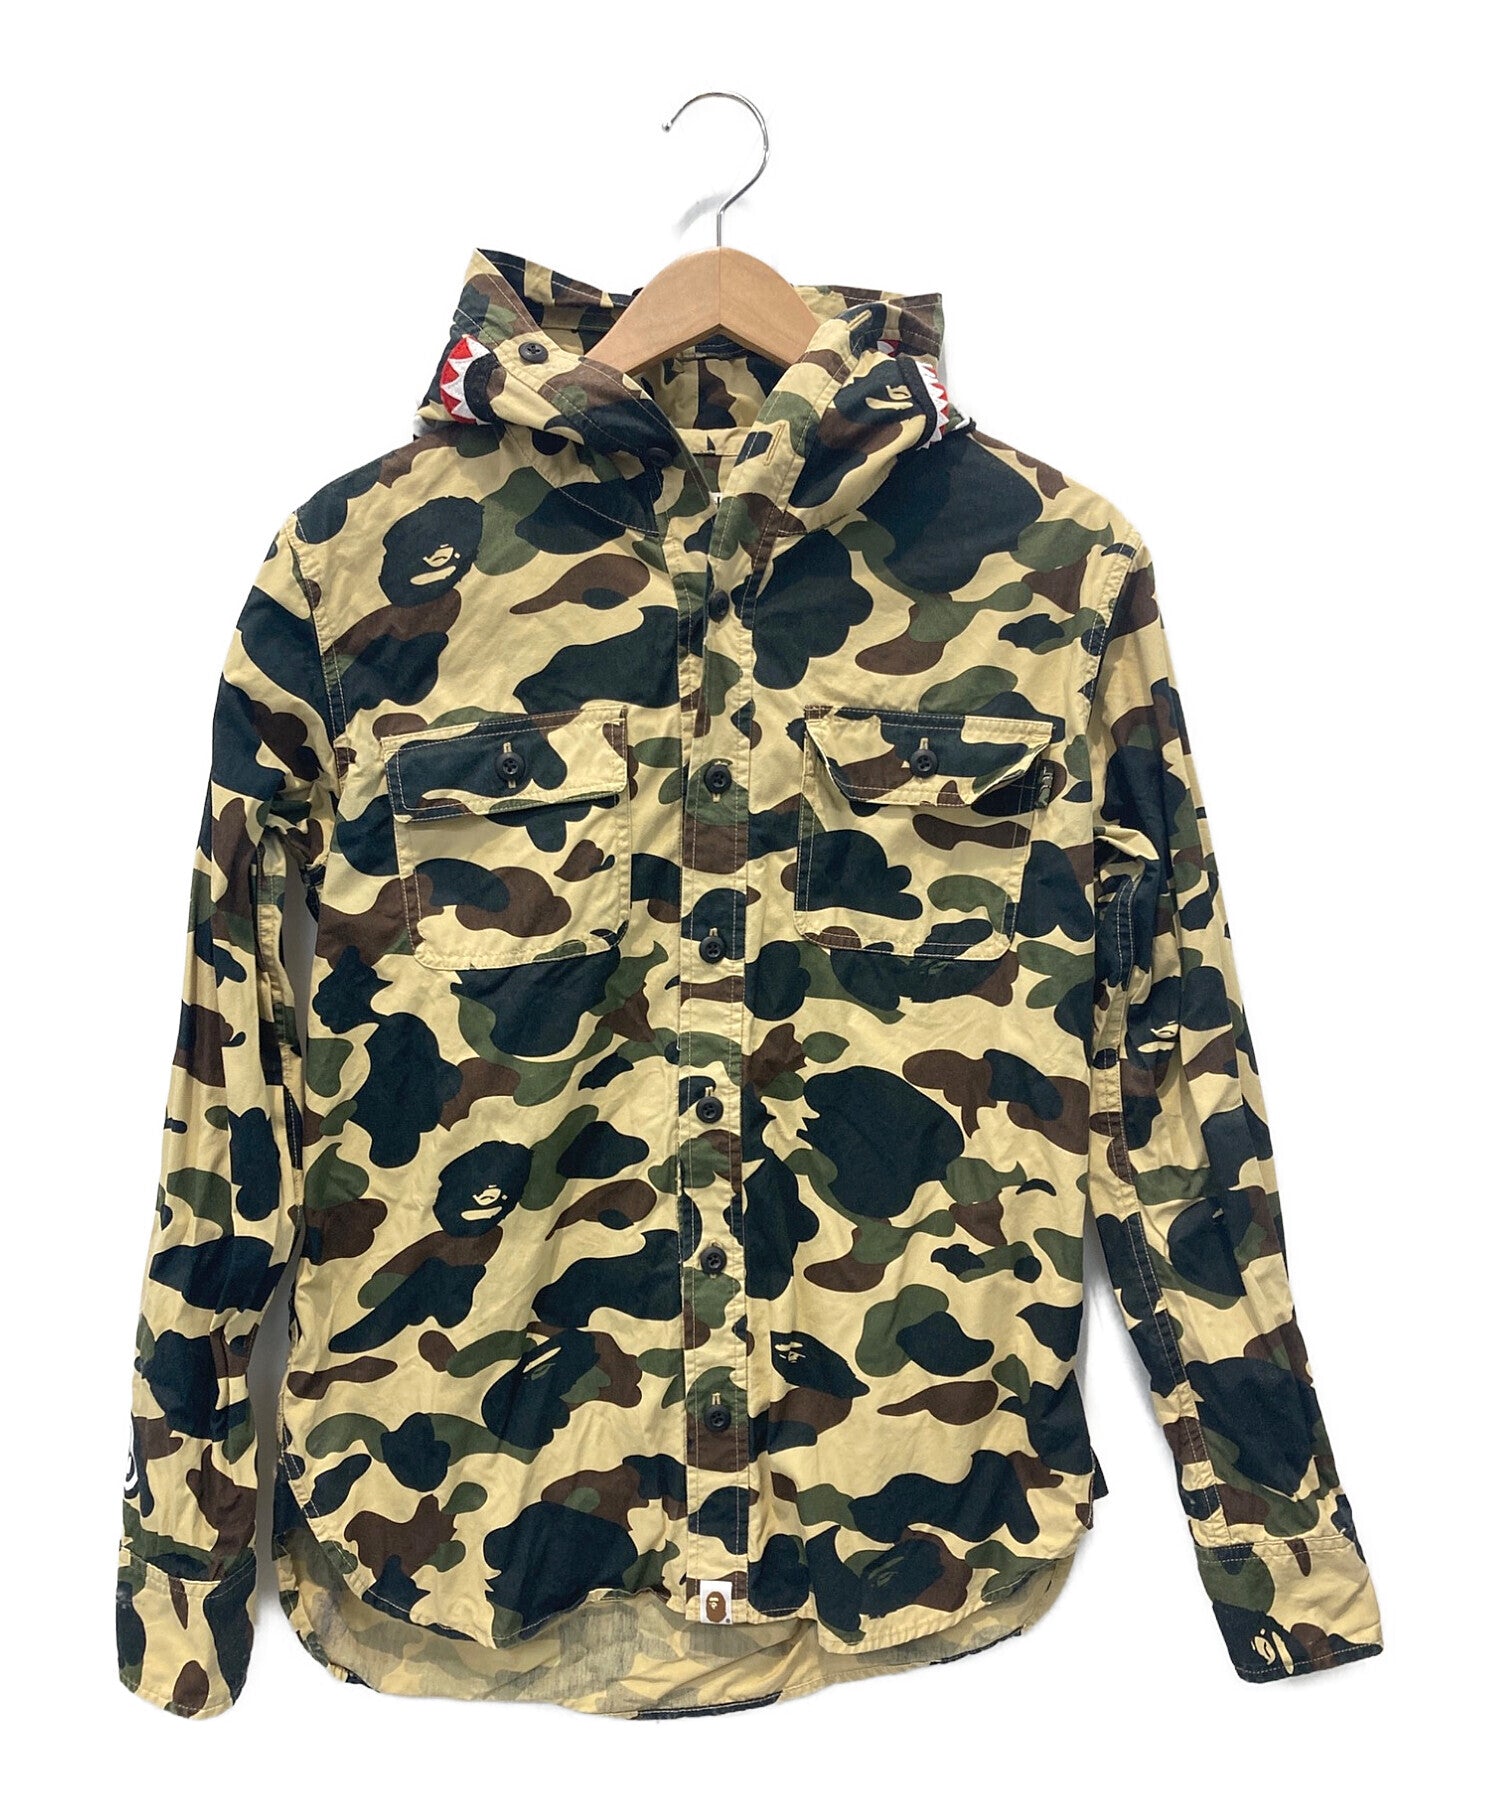 A BATHING APE Camouflage Hooded Jacket 001SHE301015X | Archive Factory